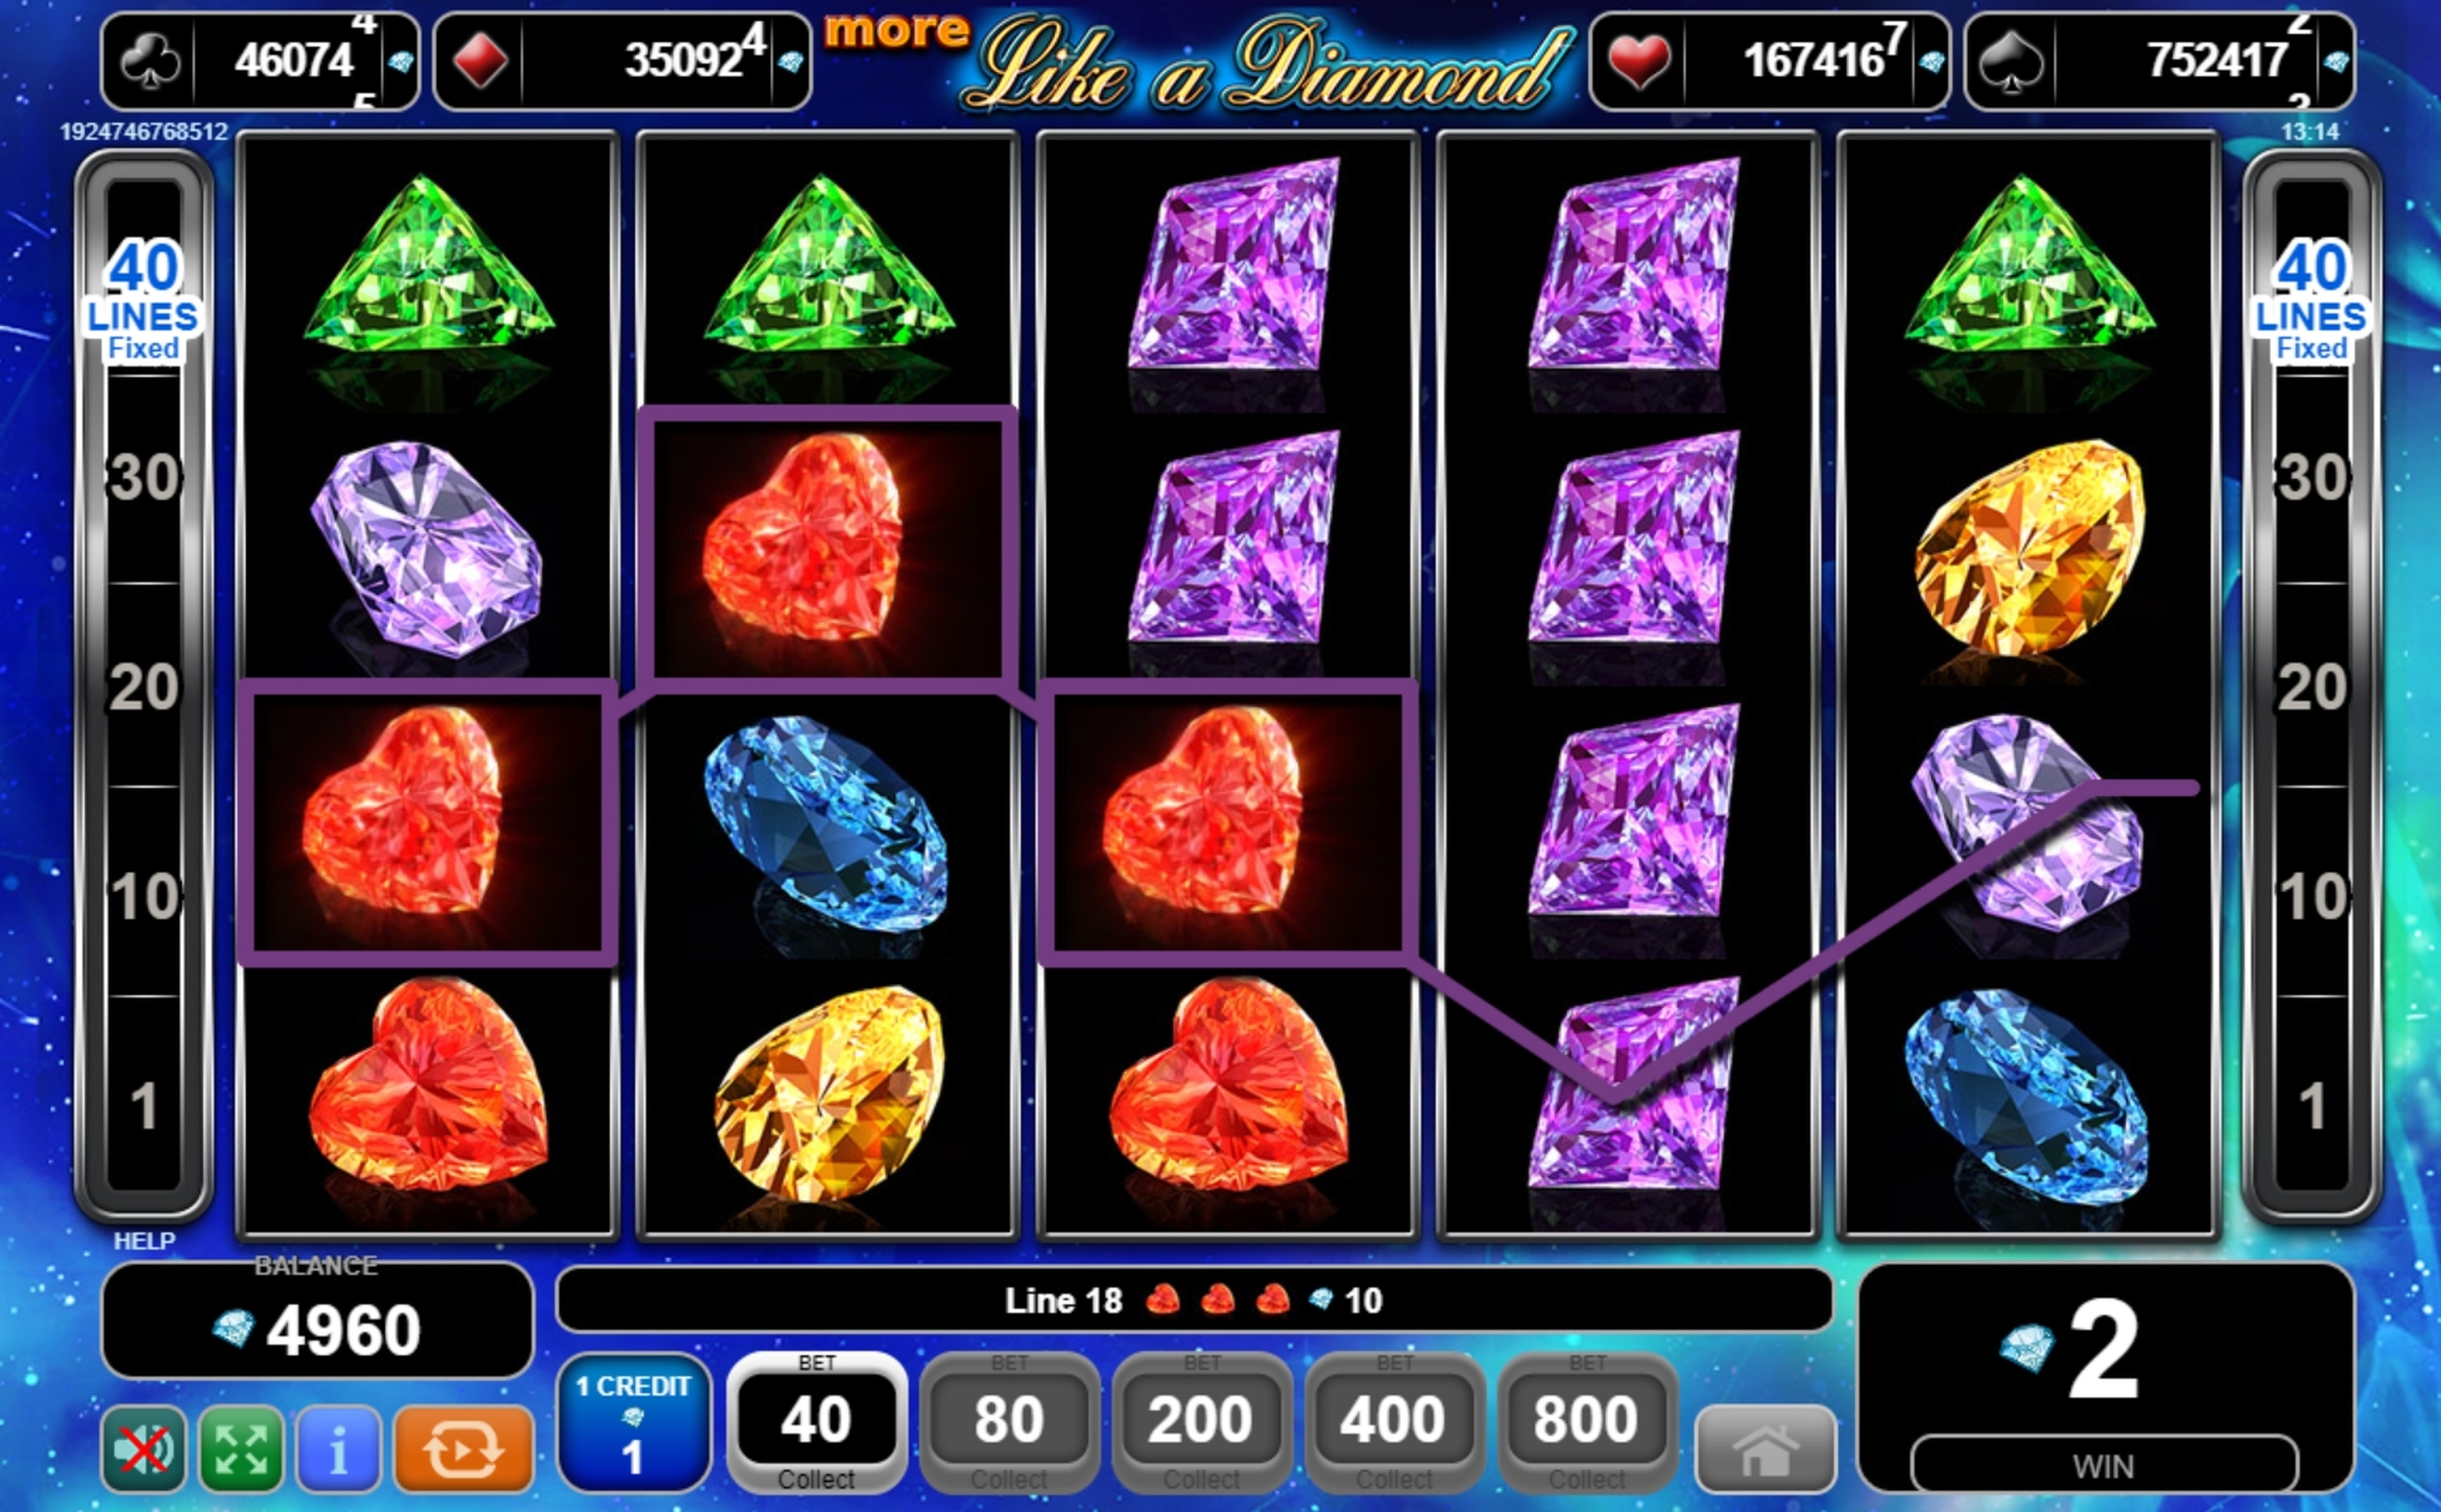 Win Money in More Like a Diamond Free Slot Game by EGT